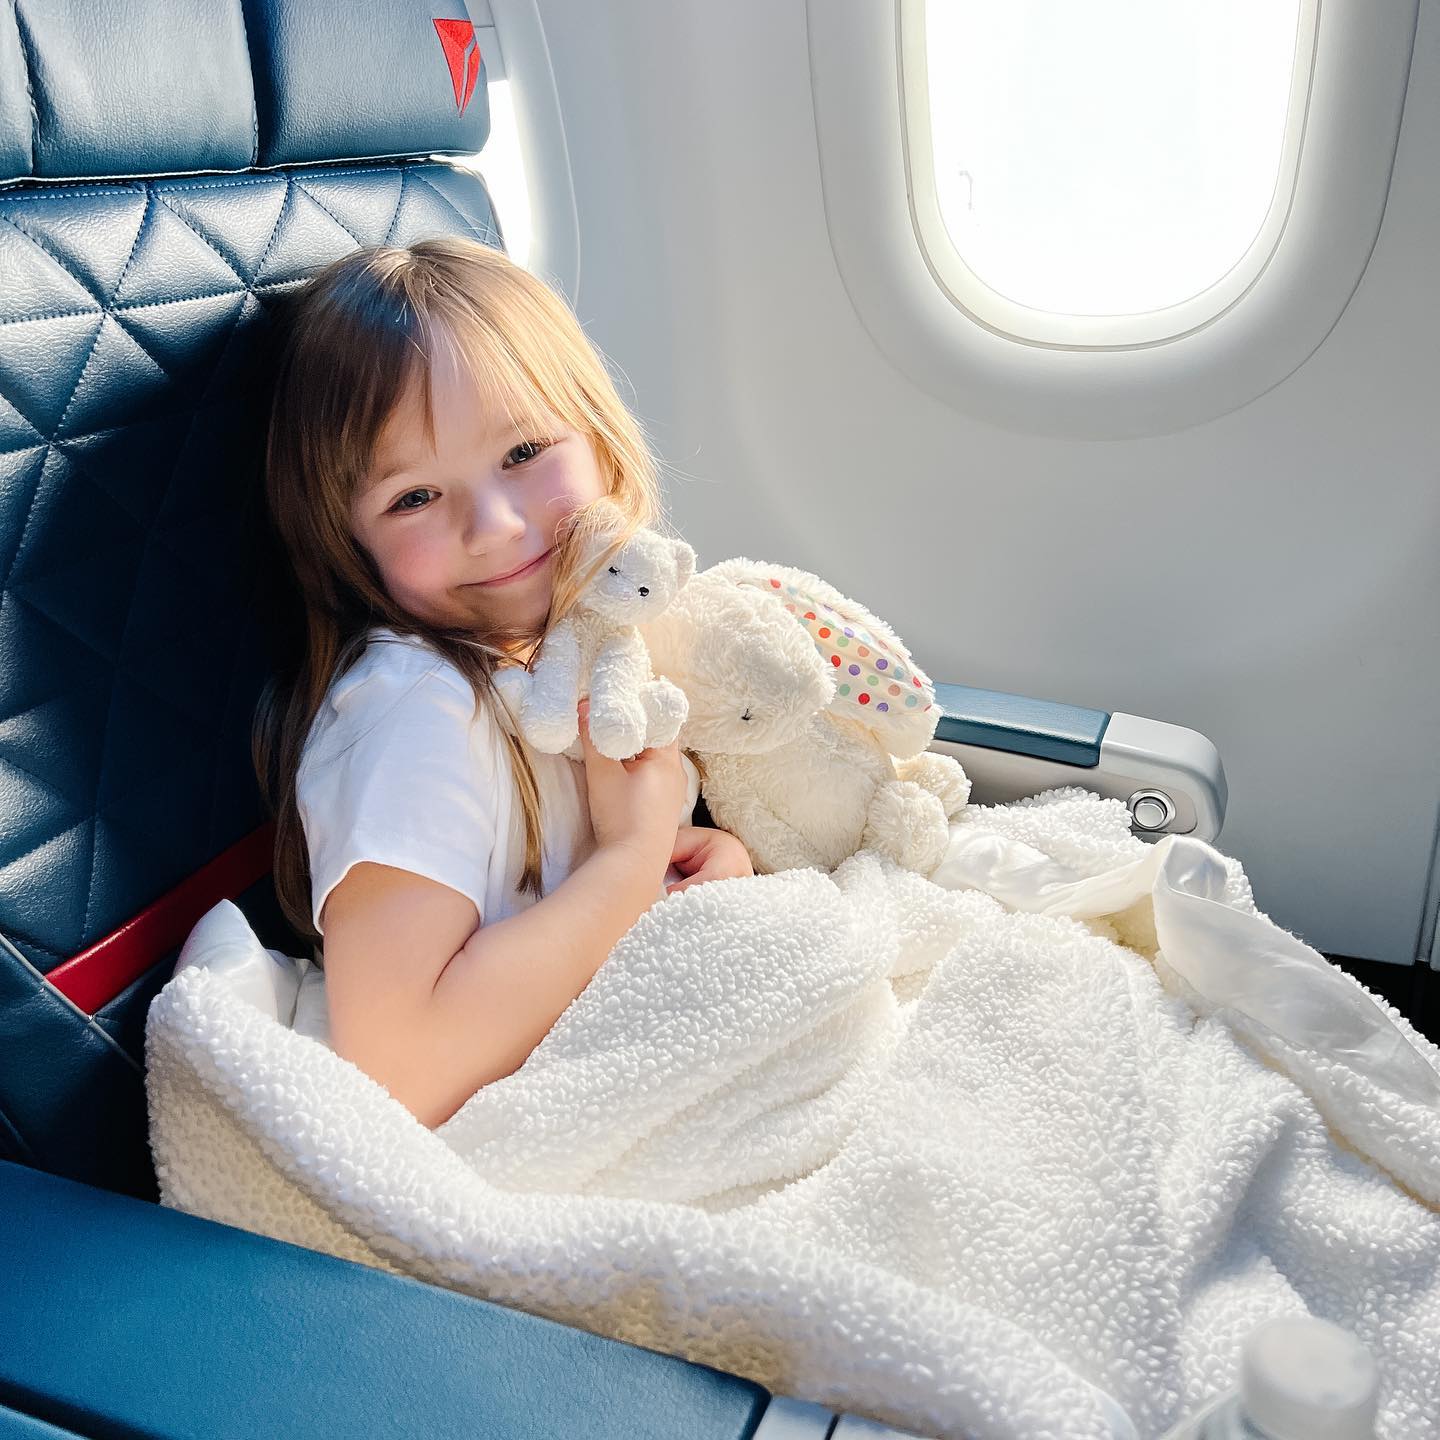 Remington Evans holding a teddy bear in sitting on an airplane seat